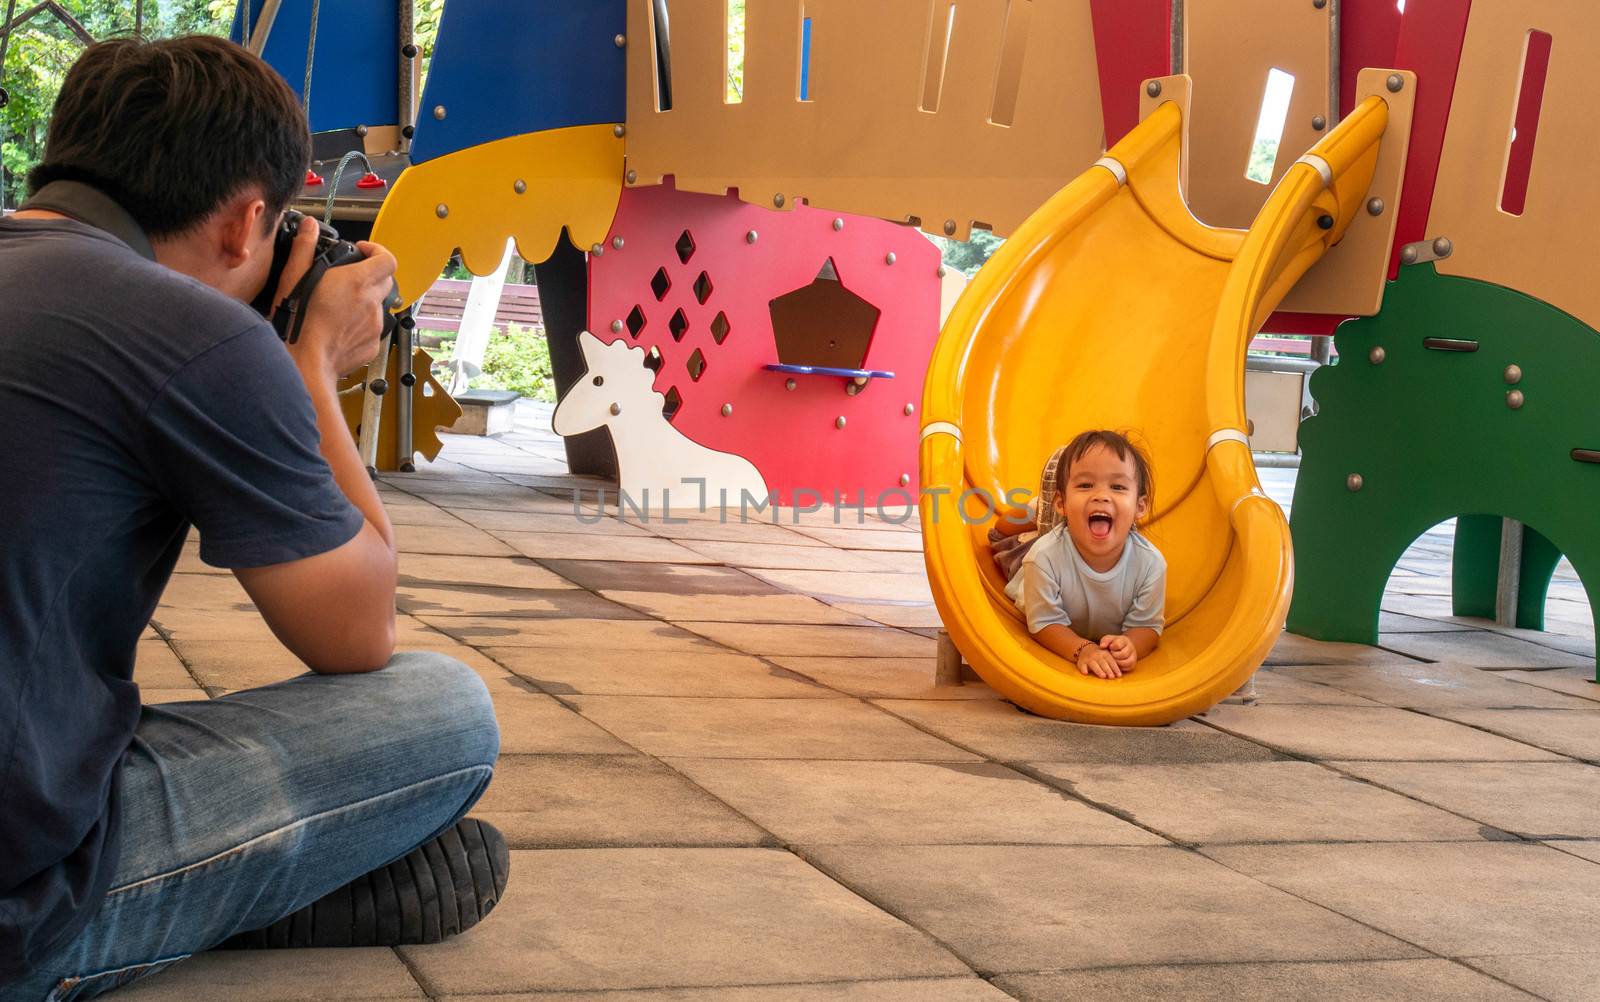 Father take a photo his daughter while having fun on slide at playground. by TEERASAK